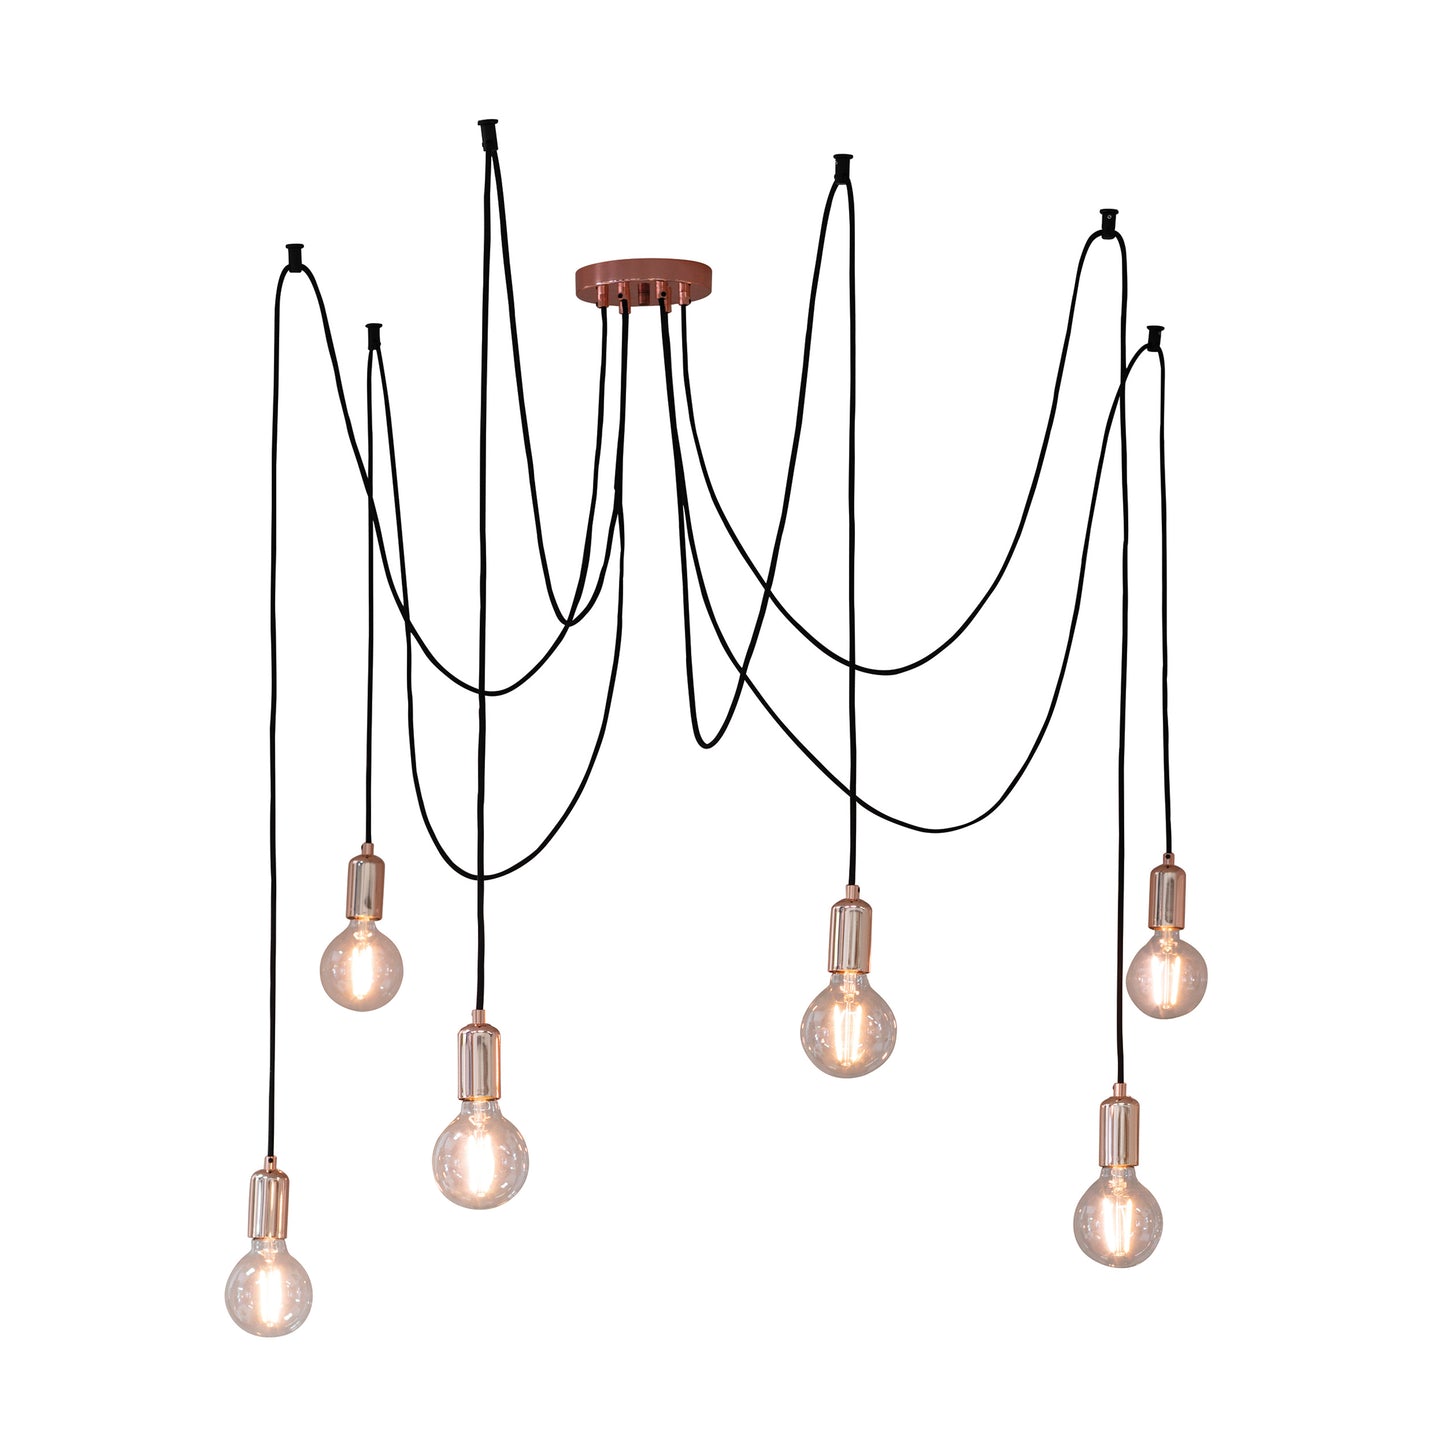 Interior decor, home furniture - Five Studio 6 Cluster Pendant Light Copper light bulbs hanging from a chain on a white background.